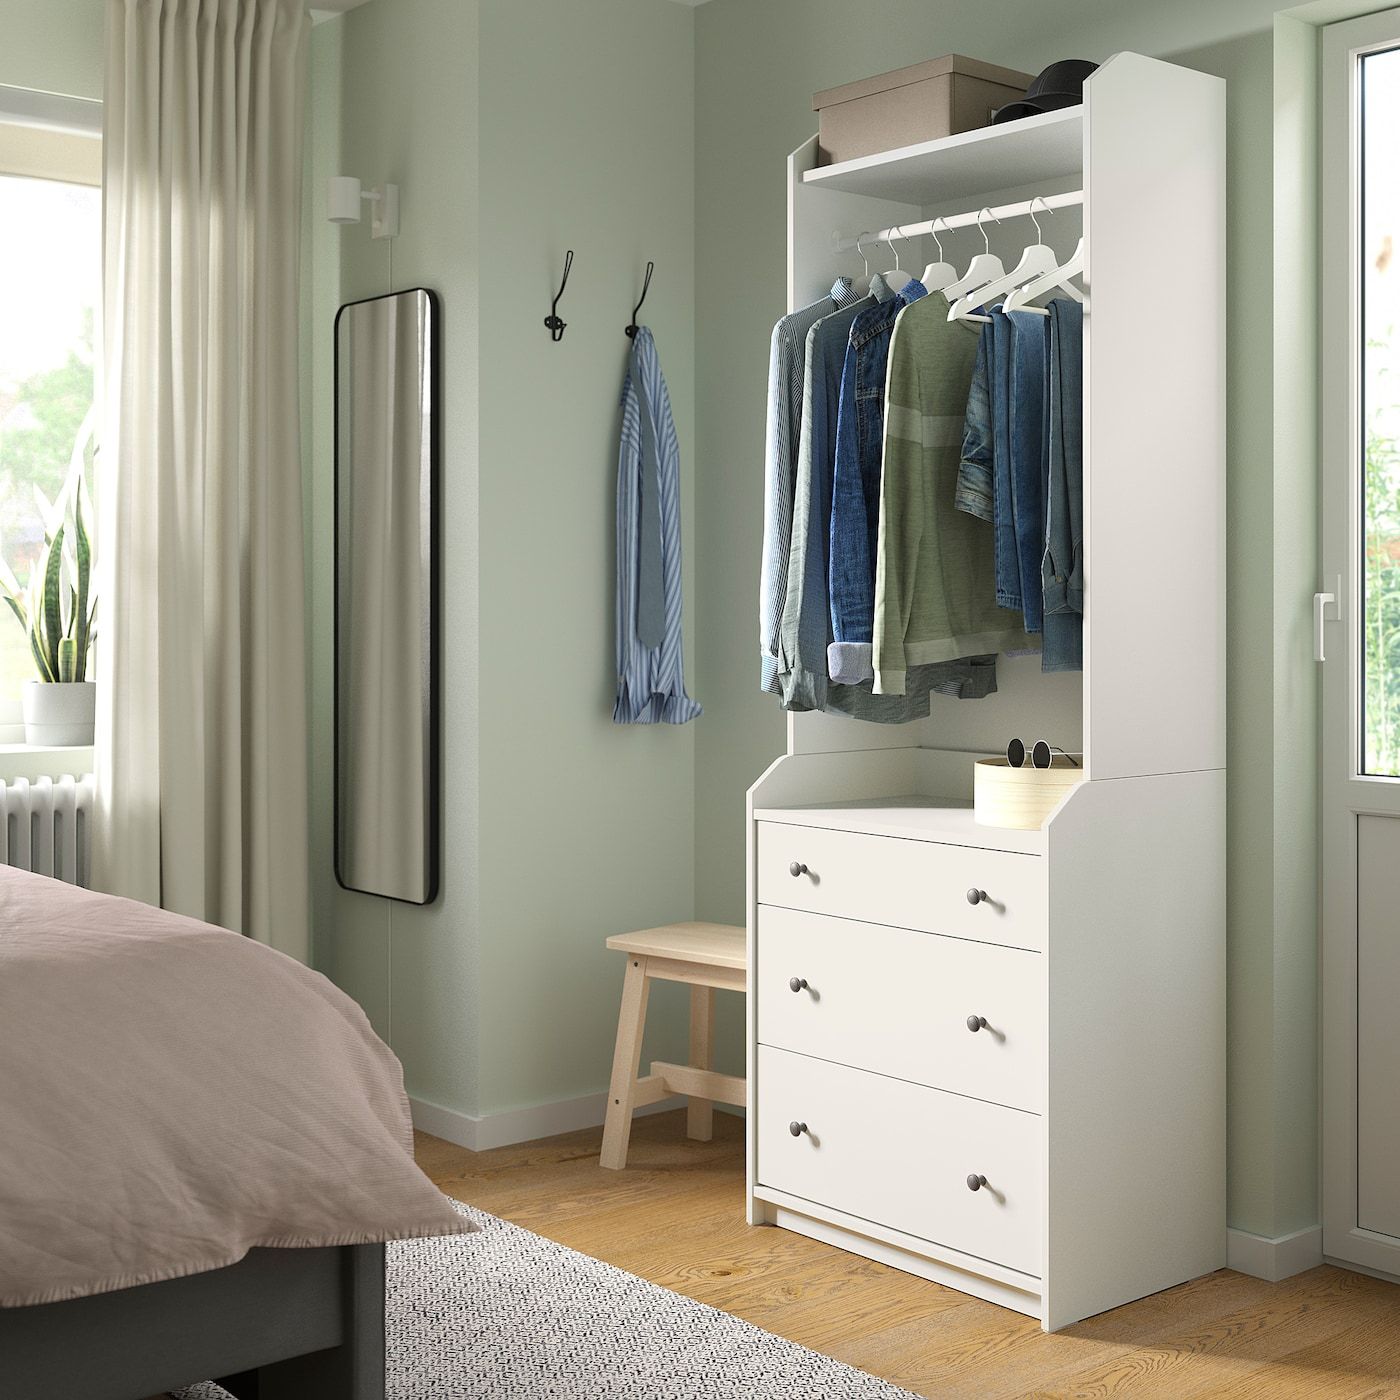 Hauga Open Wardrobe With 3 Drawers, White, 271/2x783/8" – Ikea With Regard To Cheap Wardrobes And Chest Of Drawers (View 3 of 15)